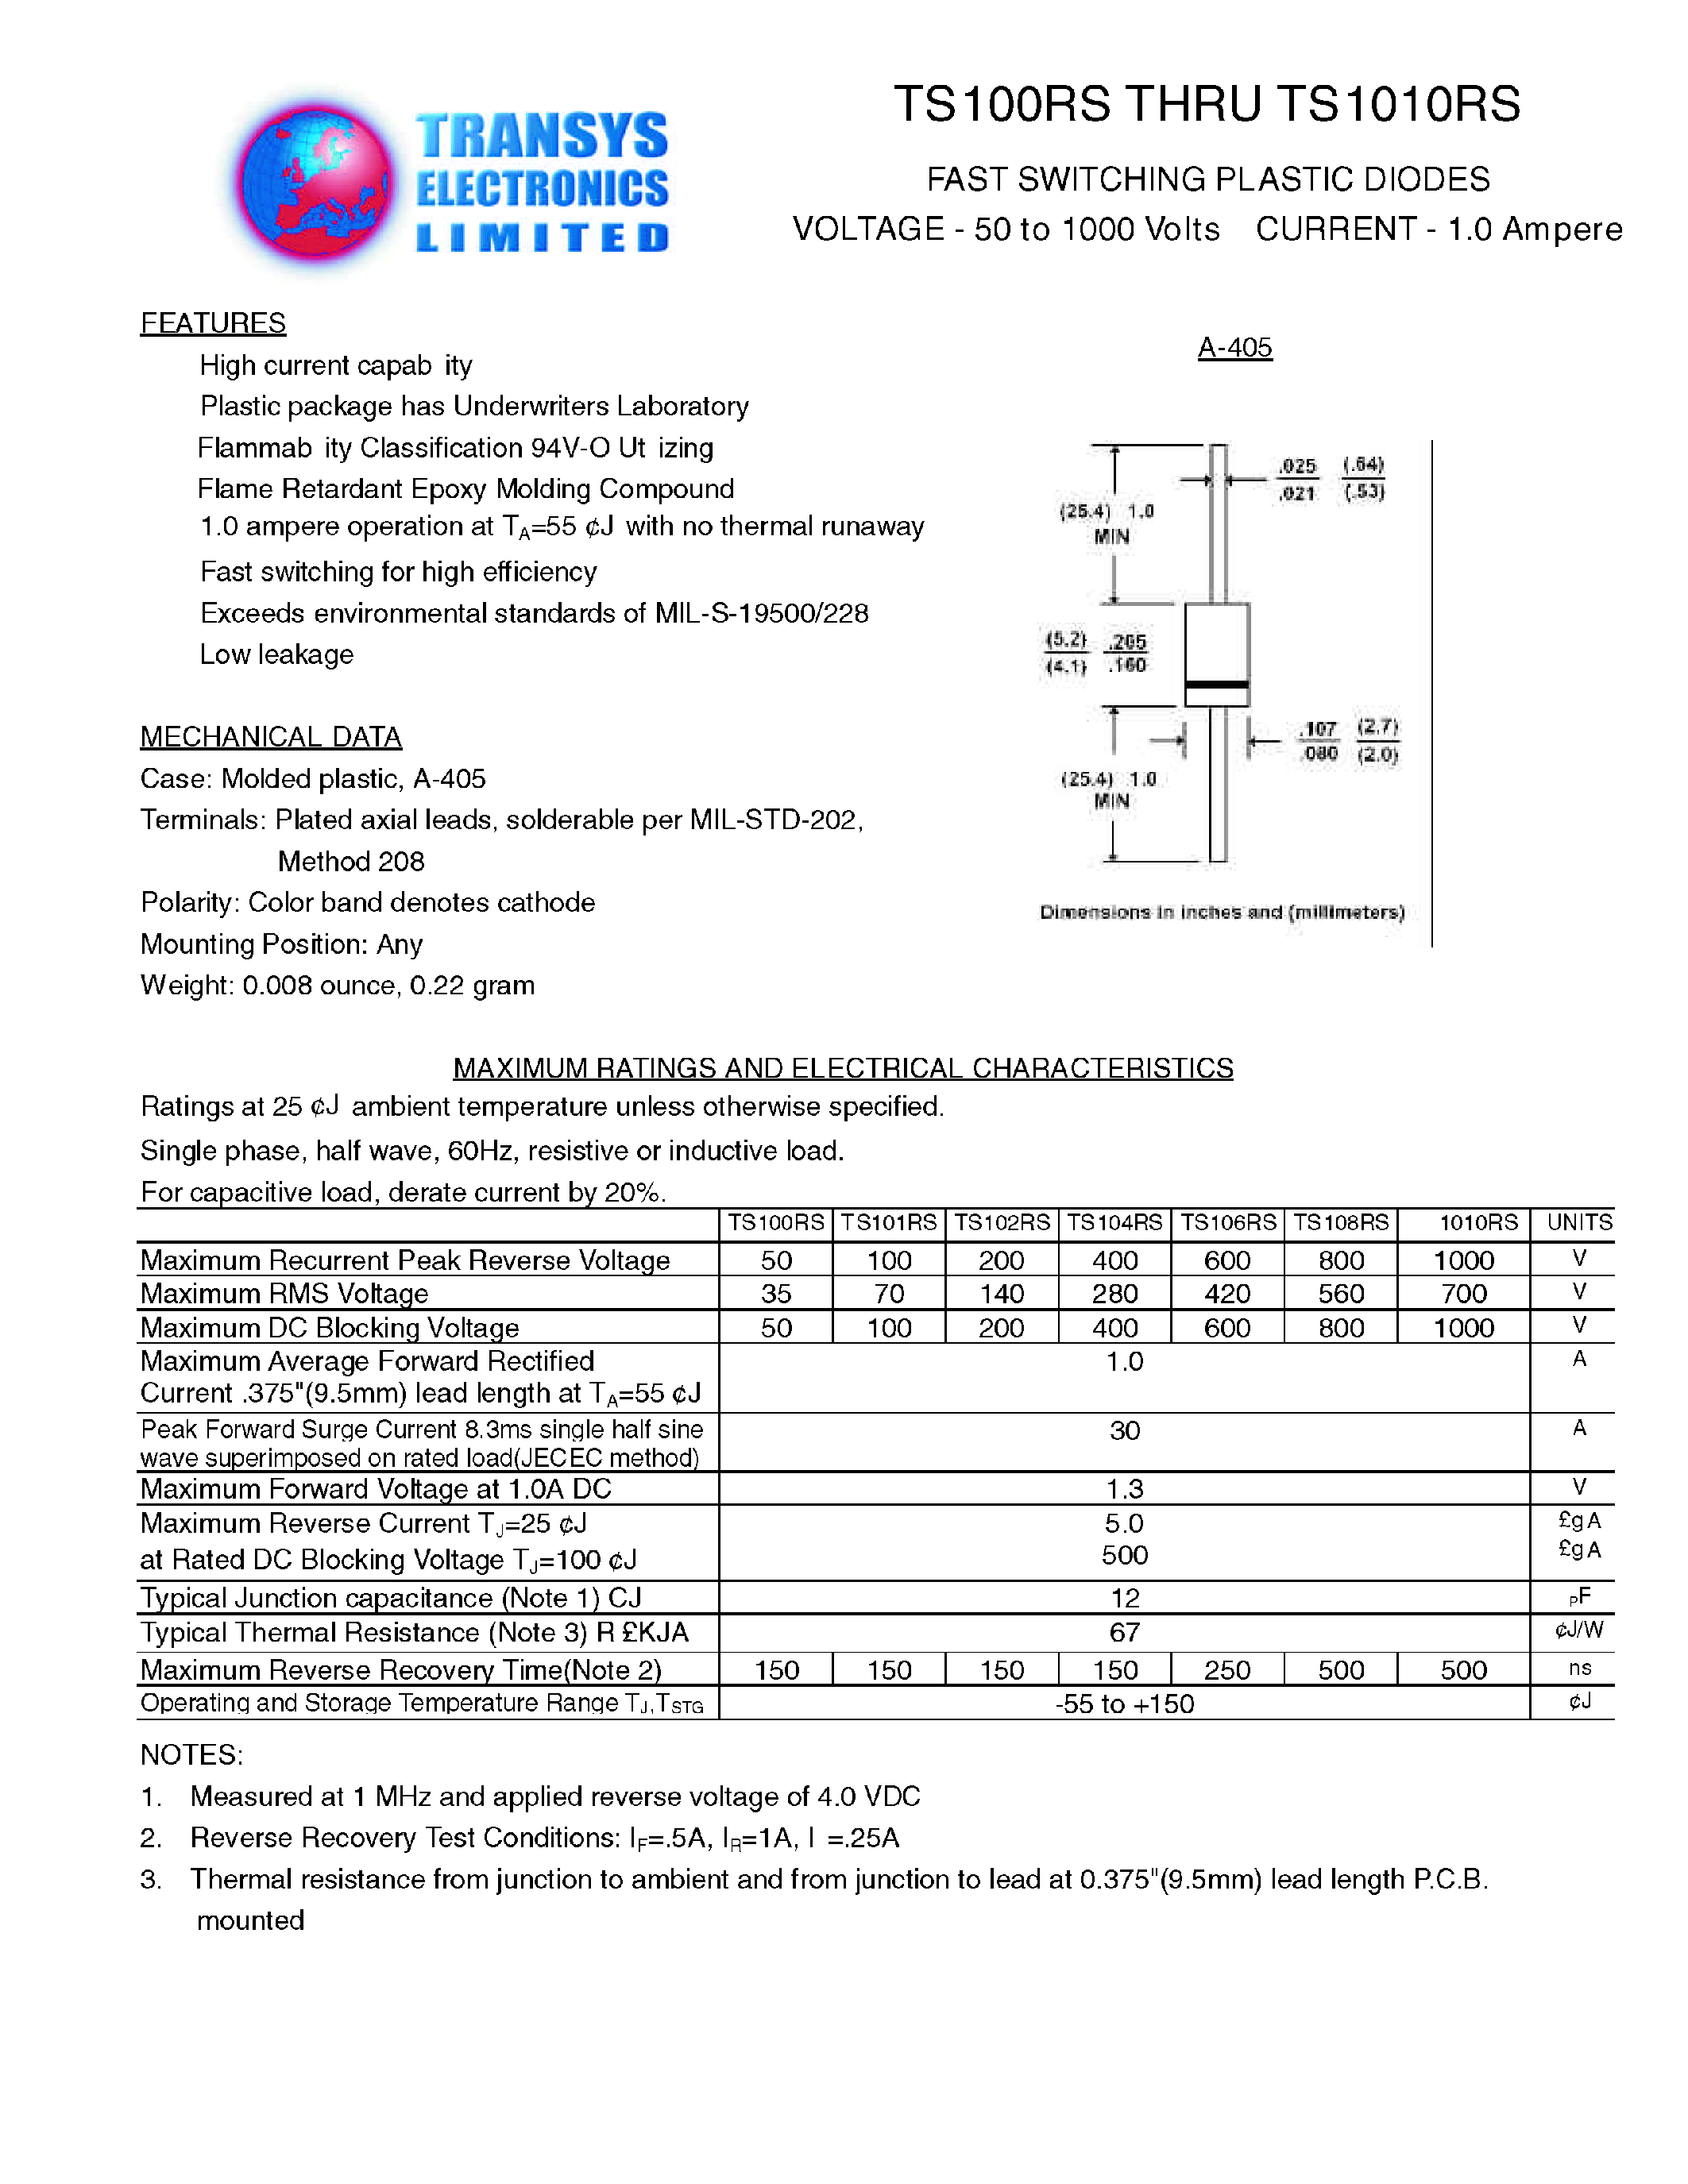 Datasheet TS1010RS - FAST SWITCHING PLASTIC DIODES page 1